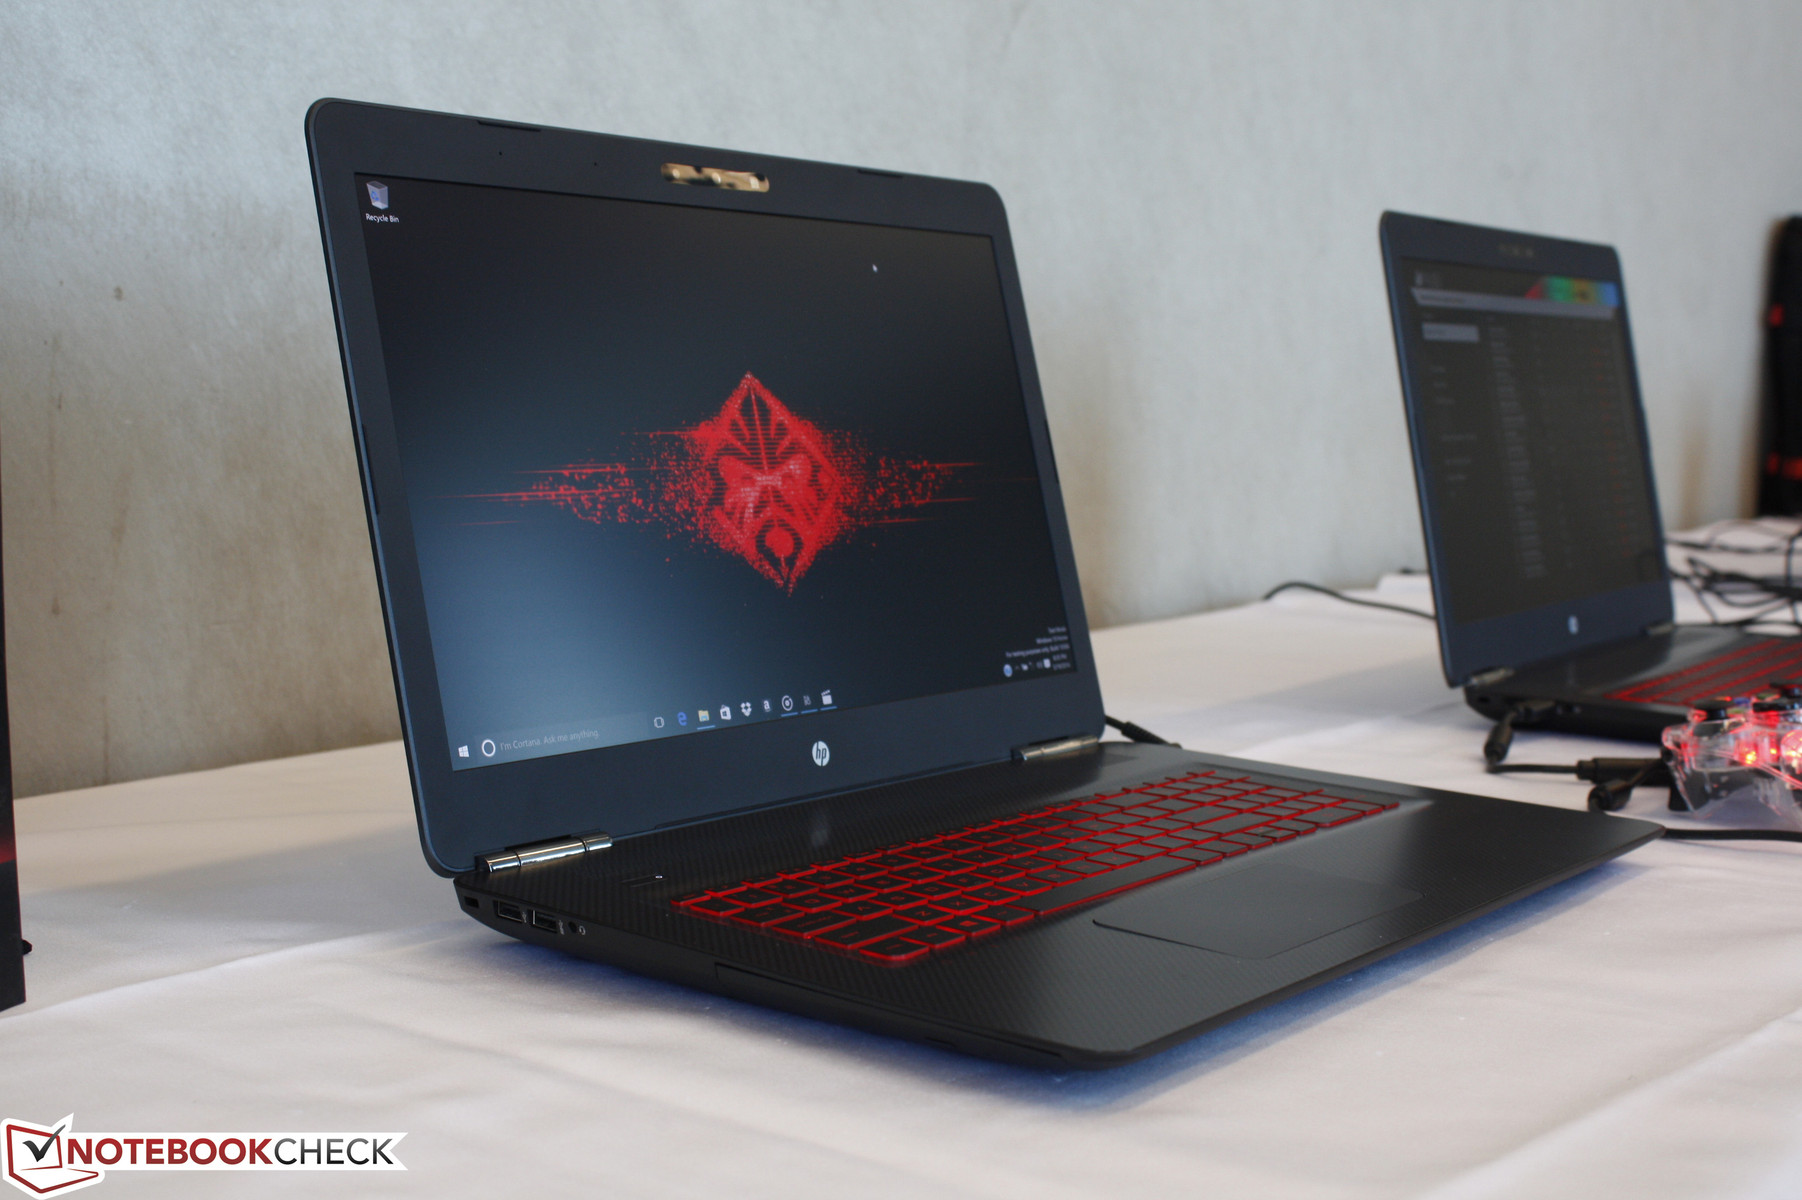 HP expands Omen gaming lineup with GTX 965M and 4K UHD options - NotebookCheck.net News1802 x 1200